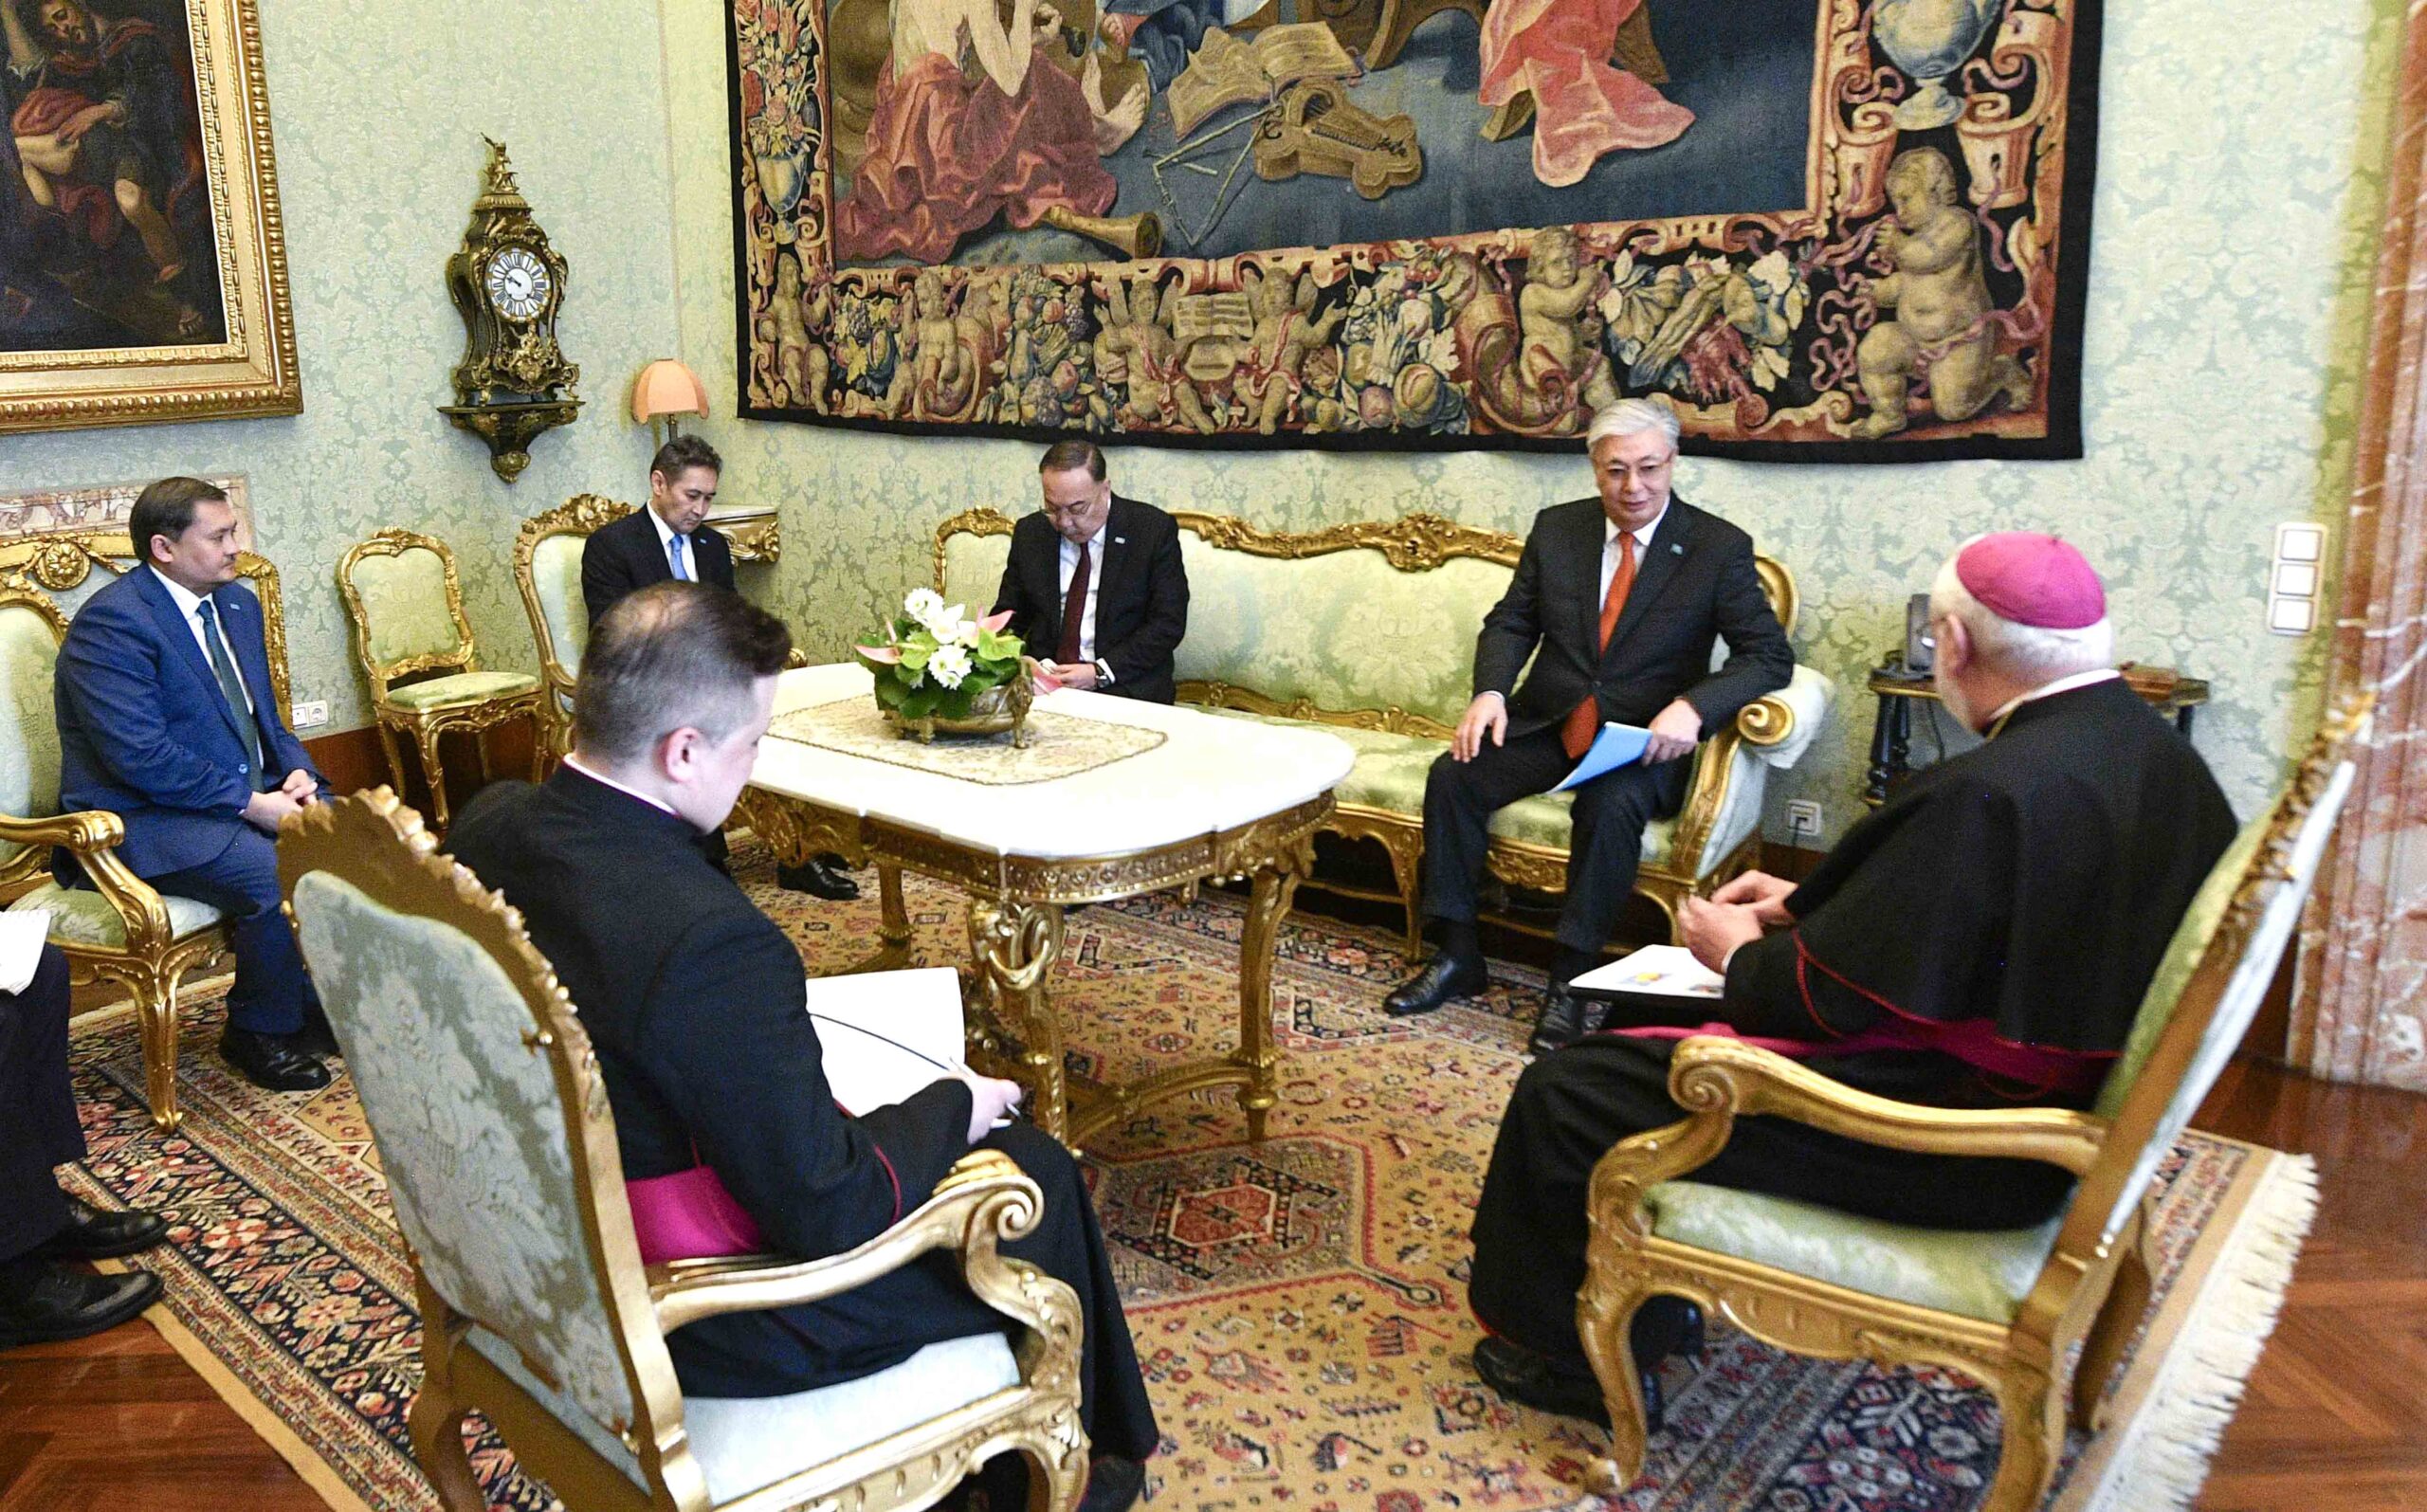 Kazakh President Holds Talks With Archbishop Paul Richard Gallagher in Vatican - The Astana Times